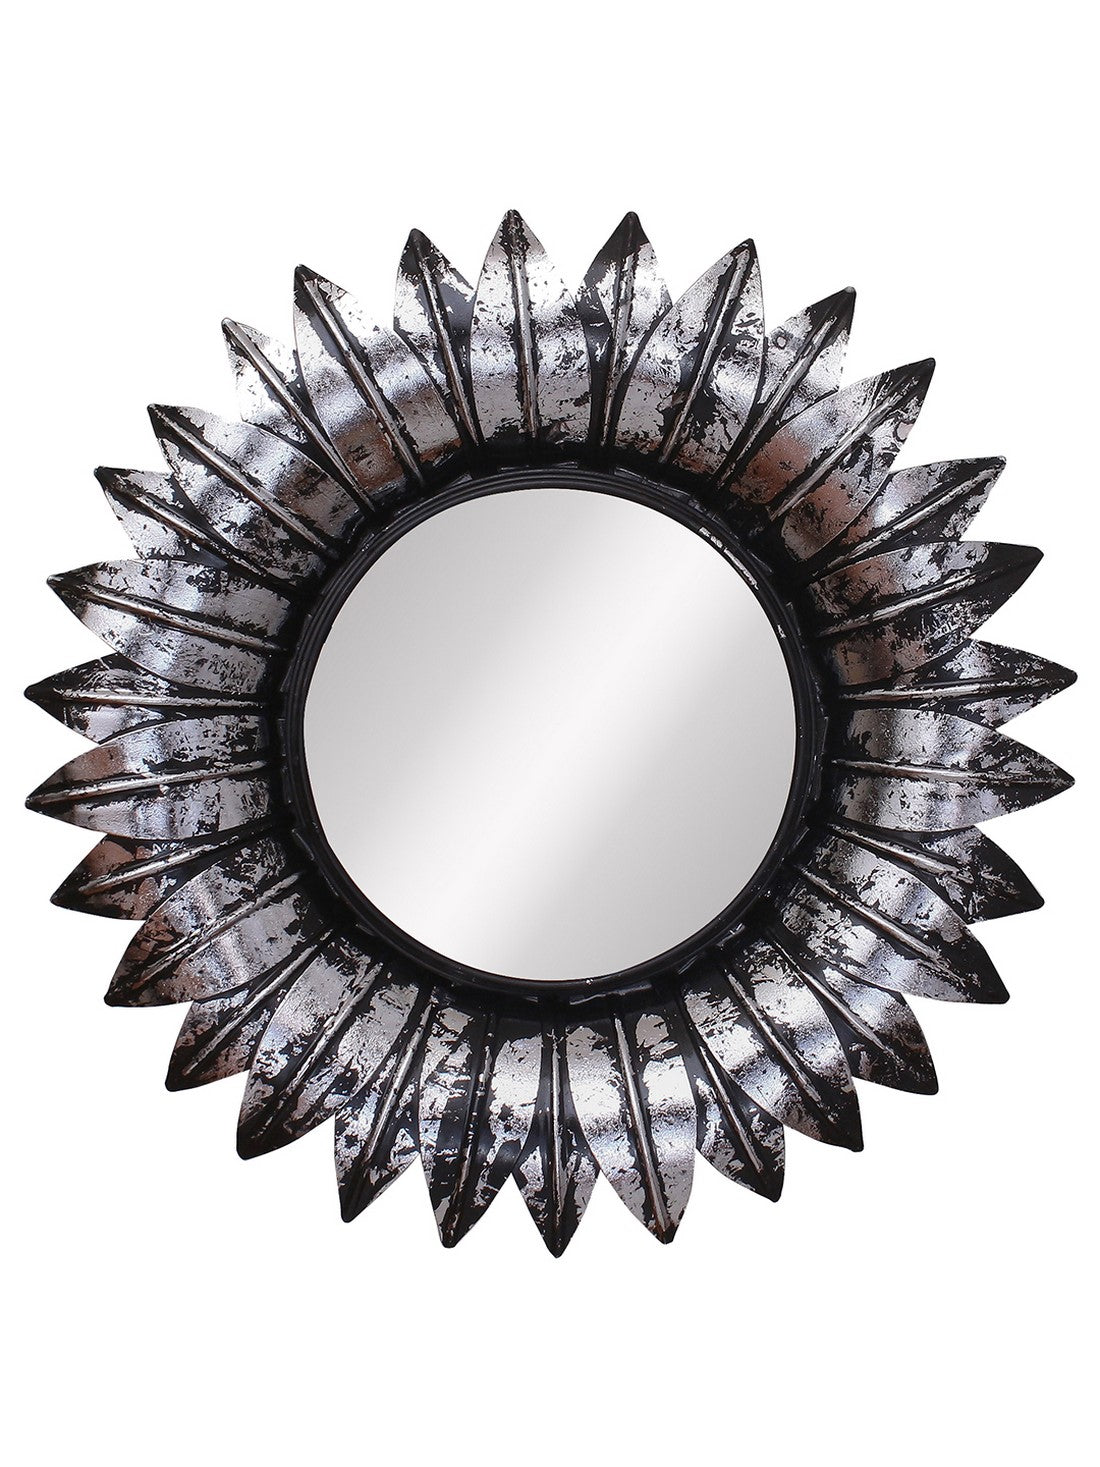 Grey and Black Decorative Metal Handcarved Wall Mirror 1